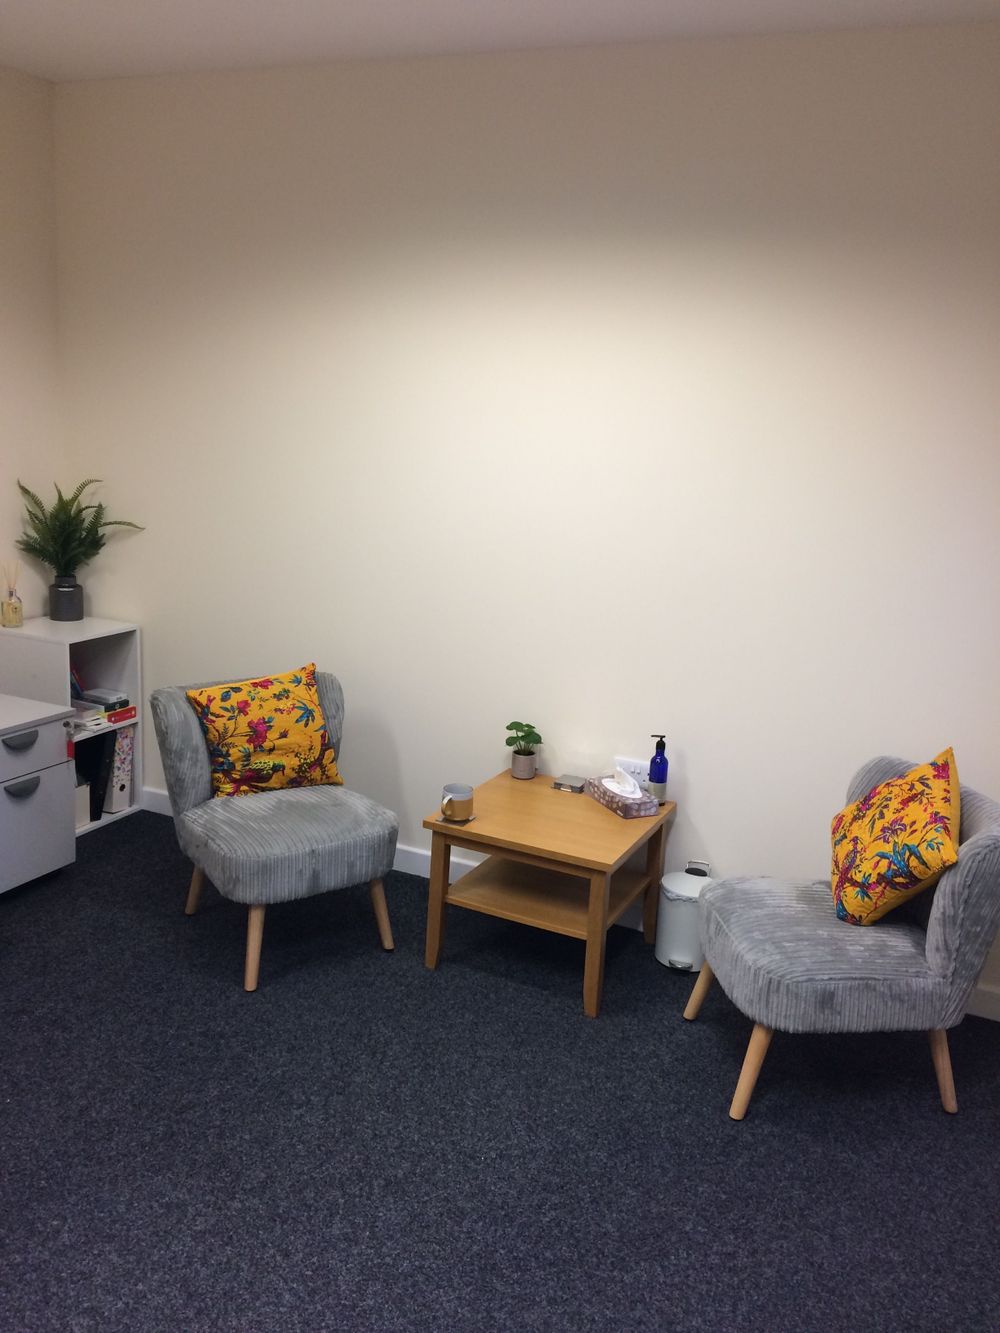 My lovely therapy room in Peebles